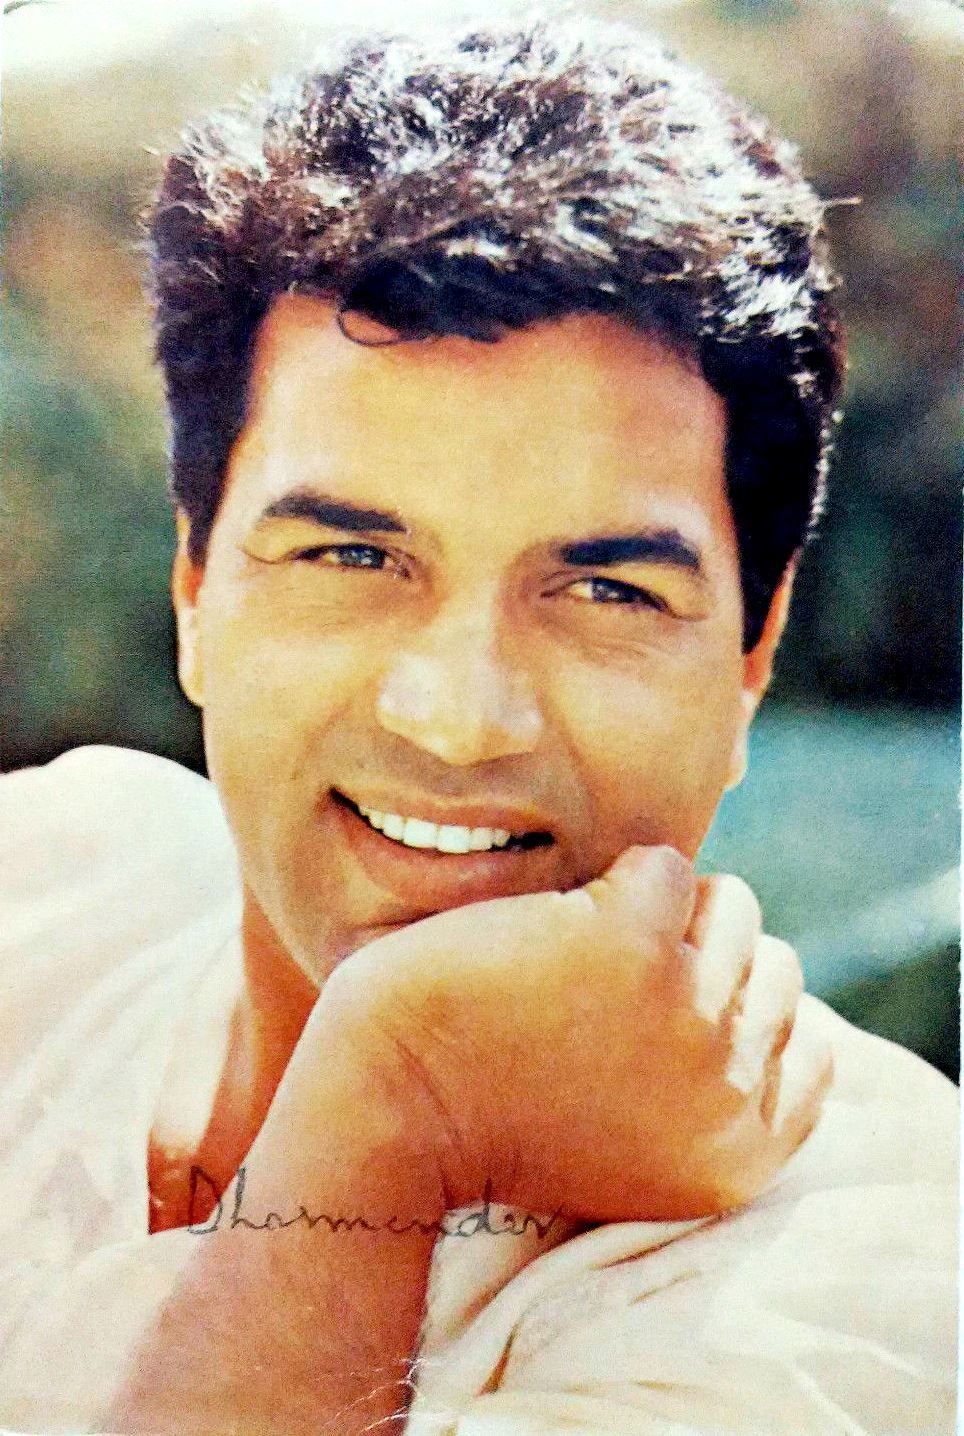 Dharmendra. Bollywood picture, Vintage bollywood, Bollywood image